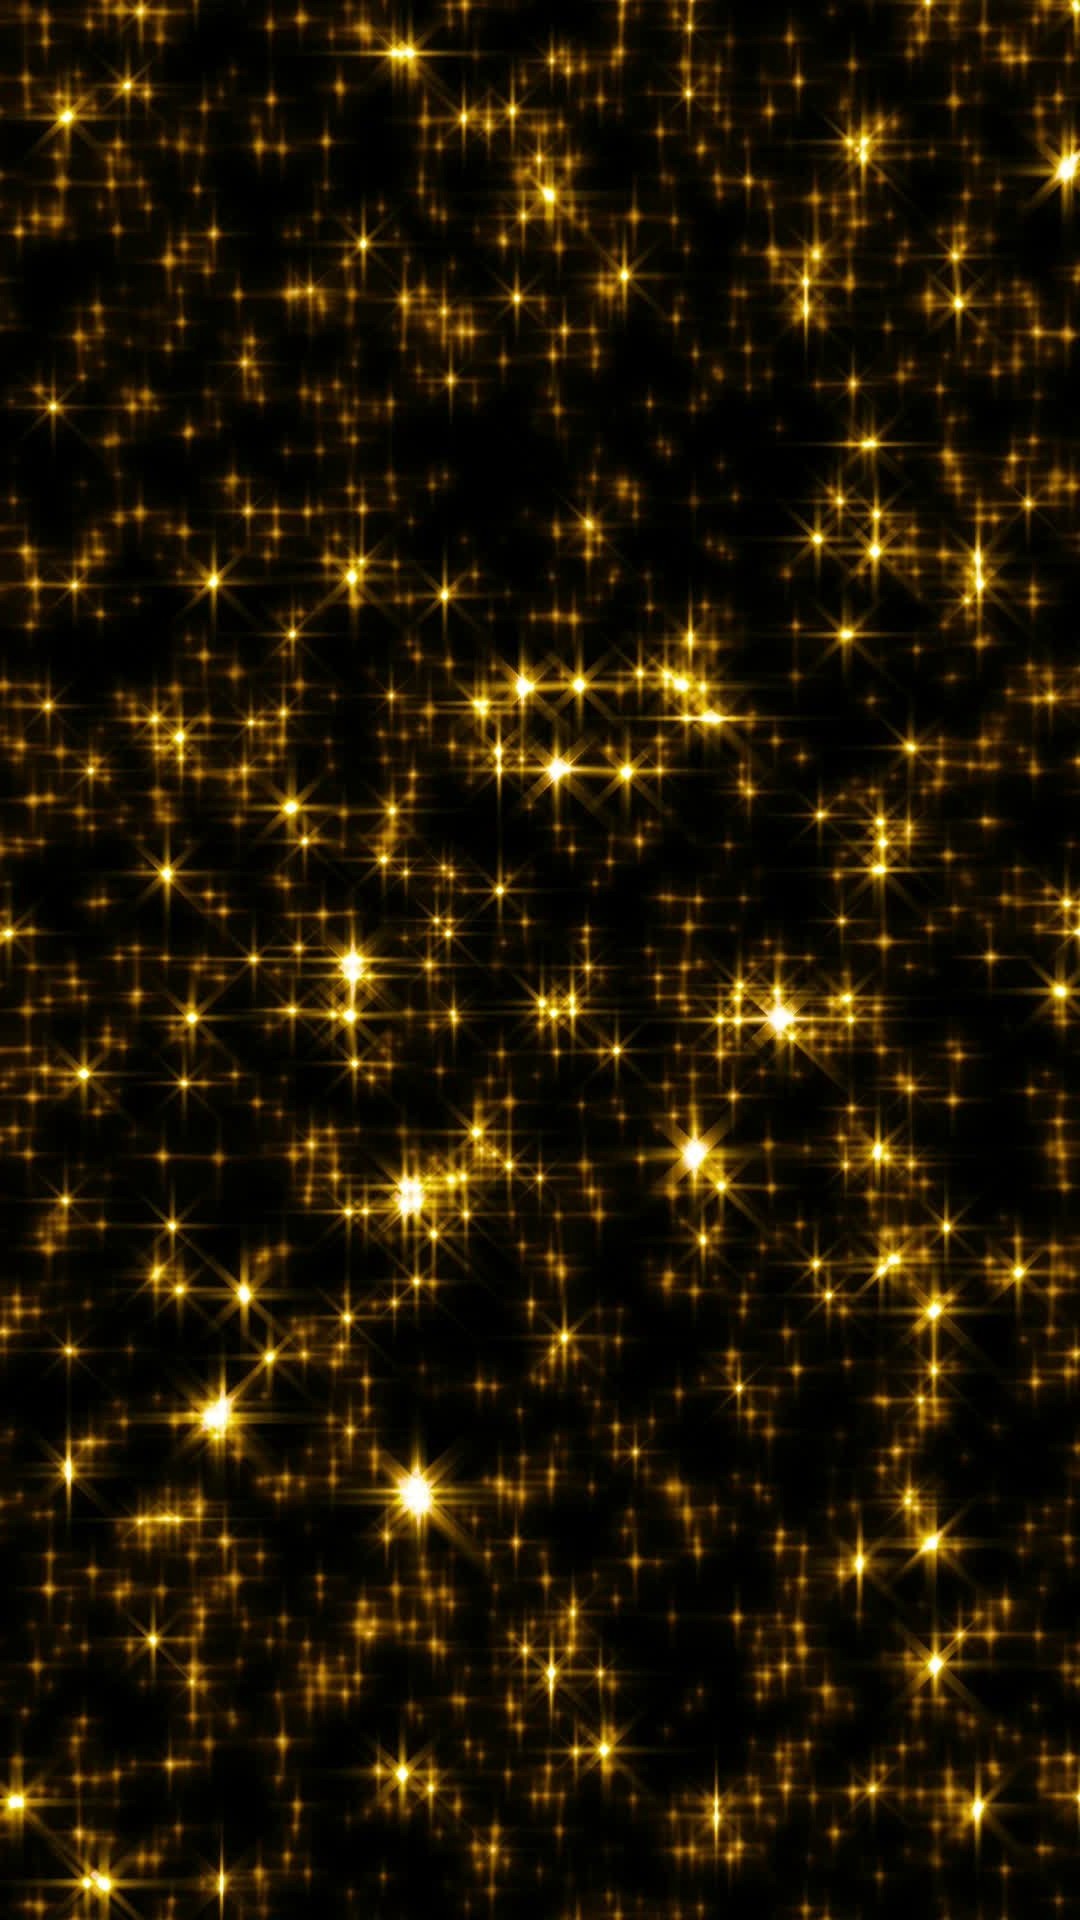 Wallpaper Iphone Black And Gold Resolution - Iphone Wallpaper Black And Gold - HD Wallpaper 